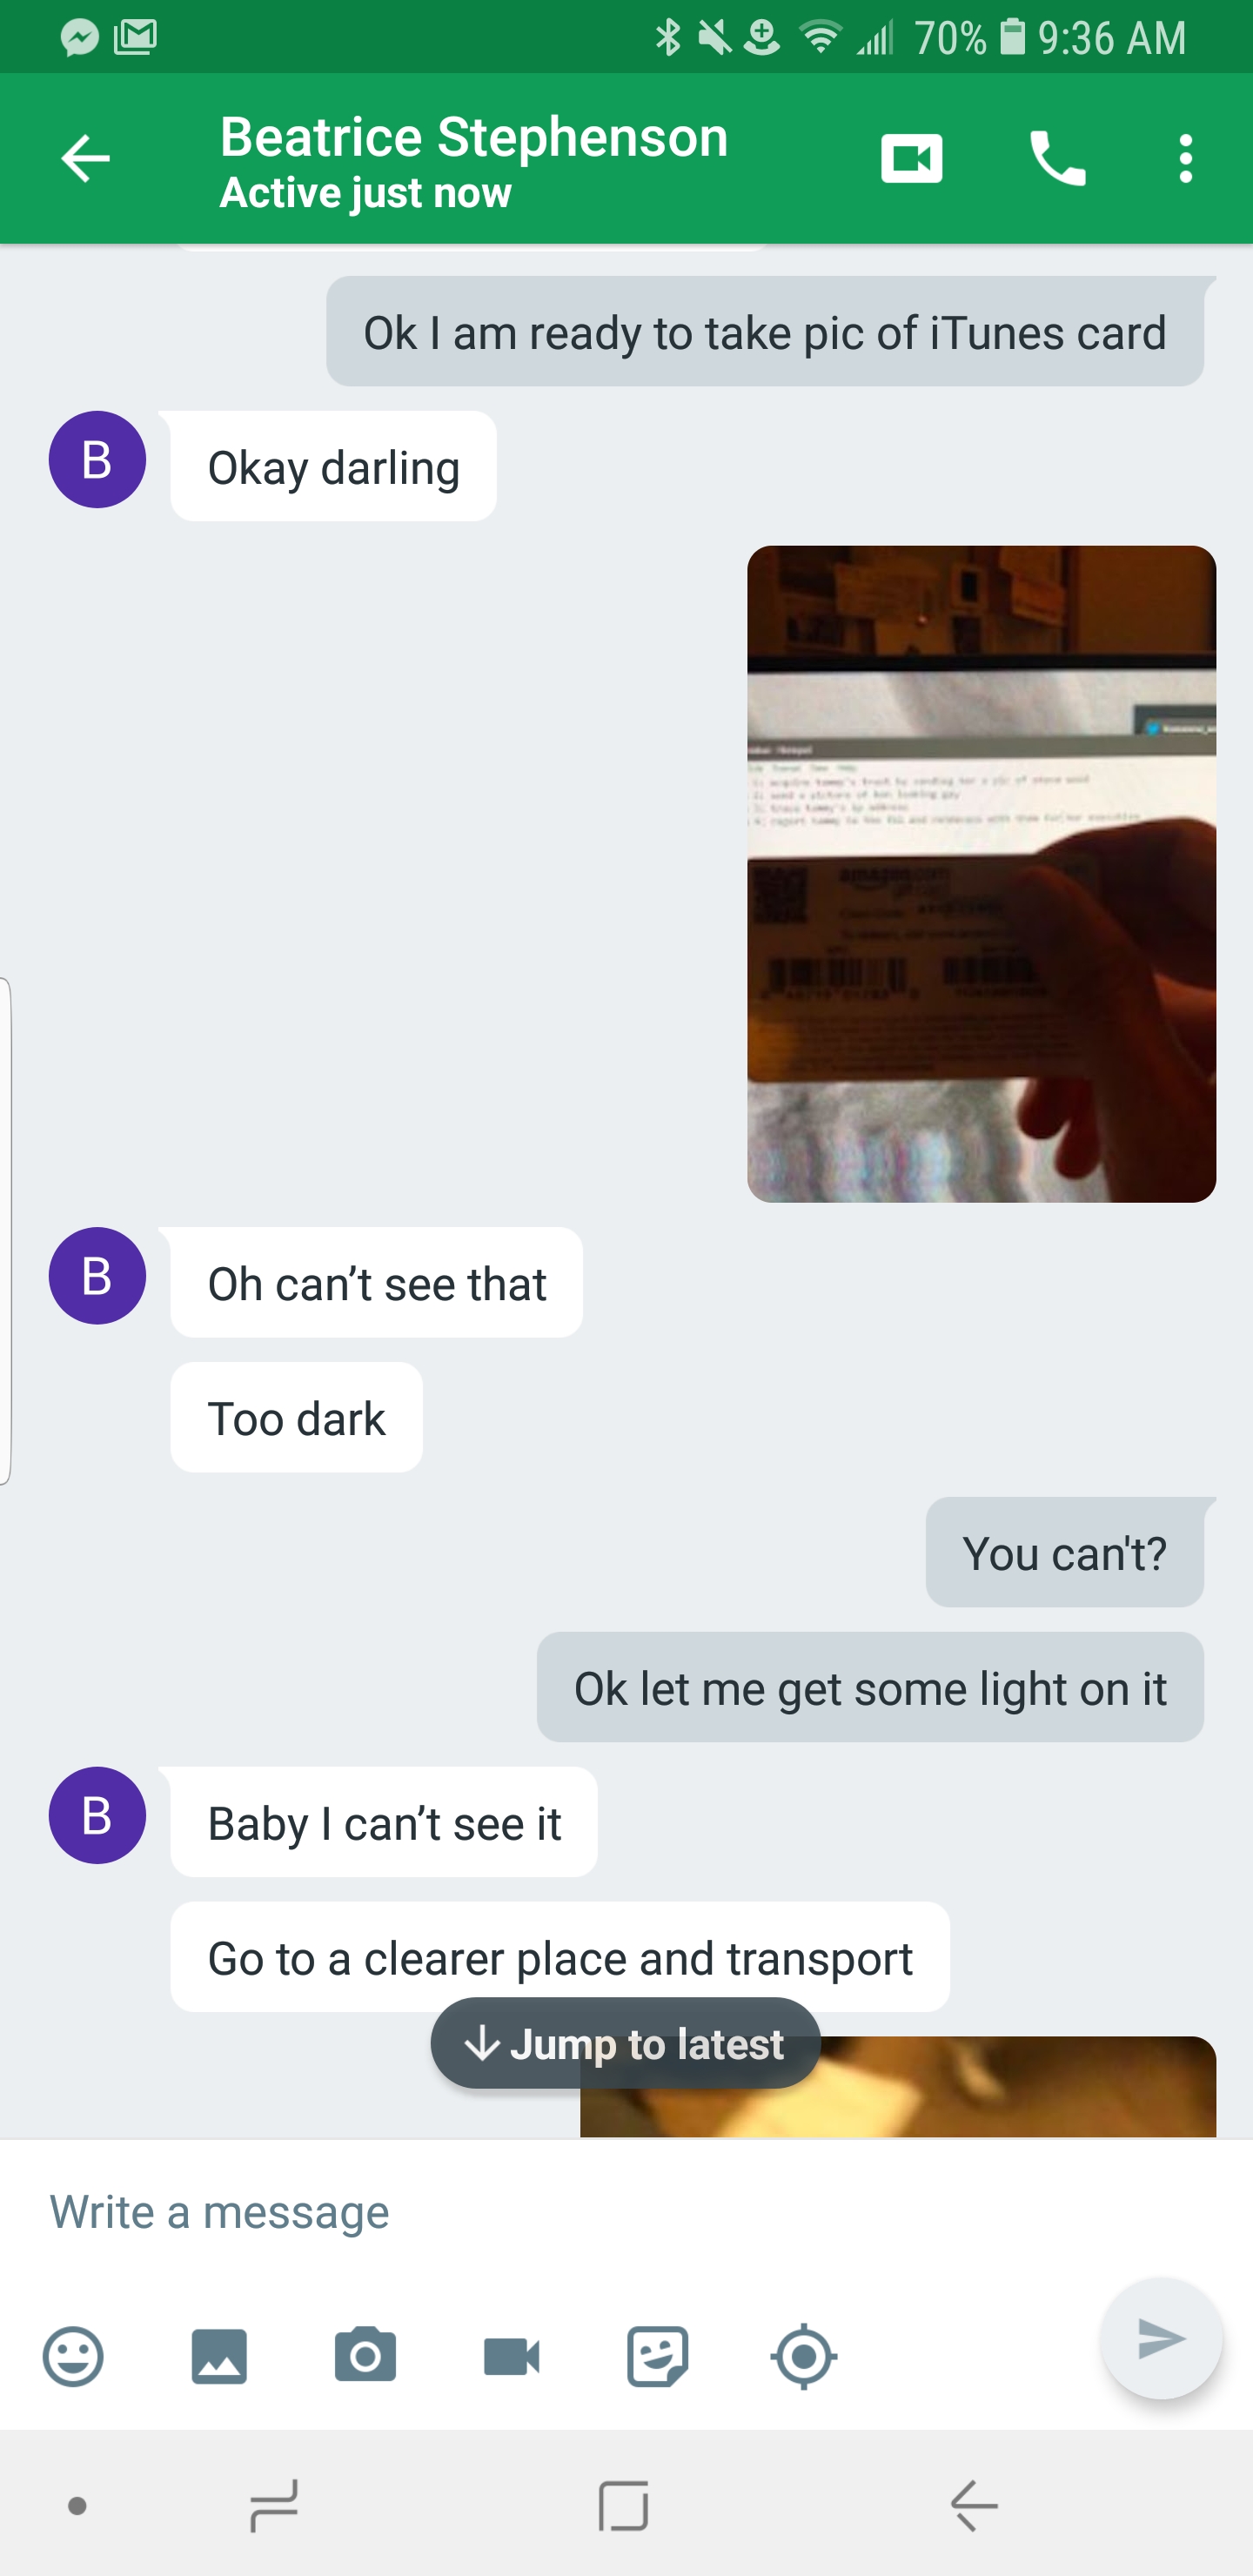 trolling conversation - 4 70 9.36 Am 9 Beatrice Stephenson Active just now Ok I am ready to take pic of iTunes card B Okay darling B Oh can't see that Too dark You can't? Ok let me get some light on it Baby I can't see it Go to a clearer place and transpo